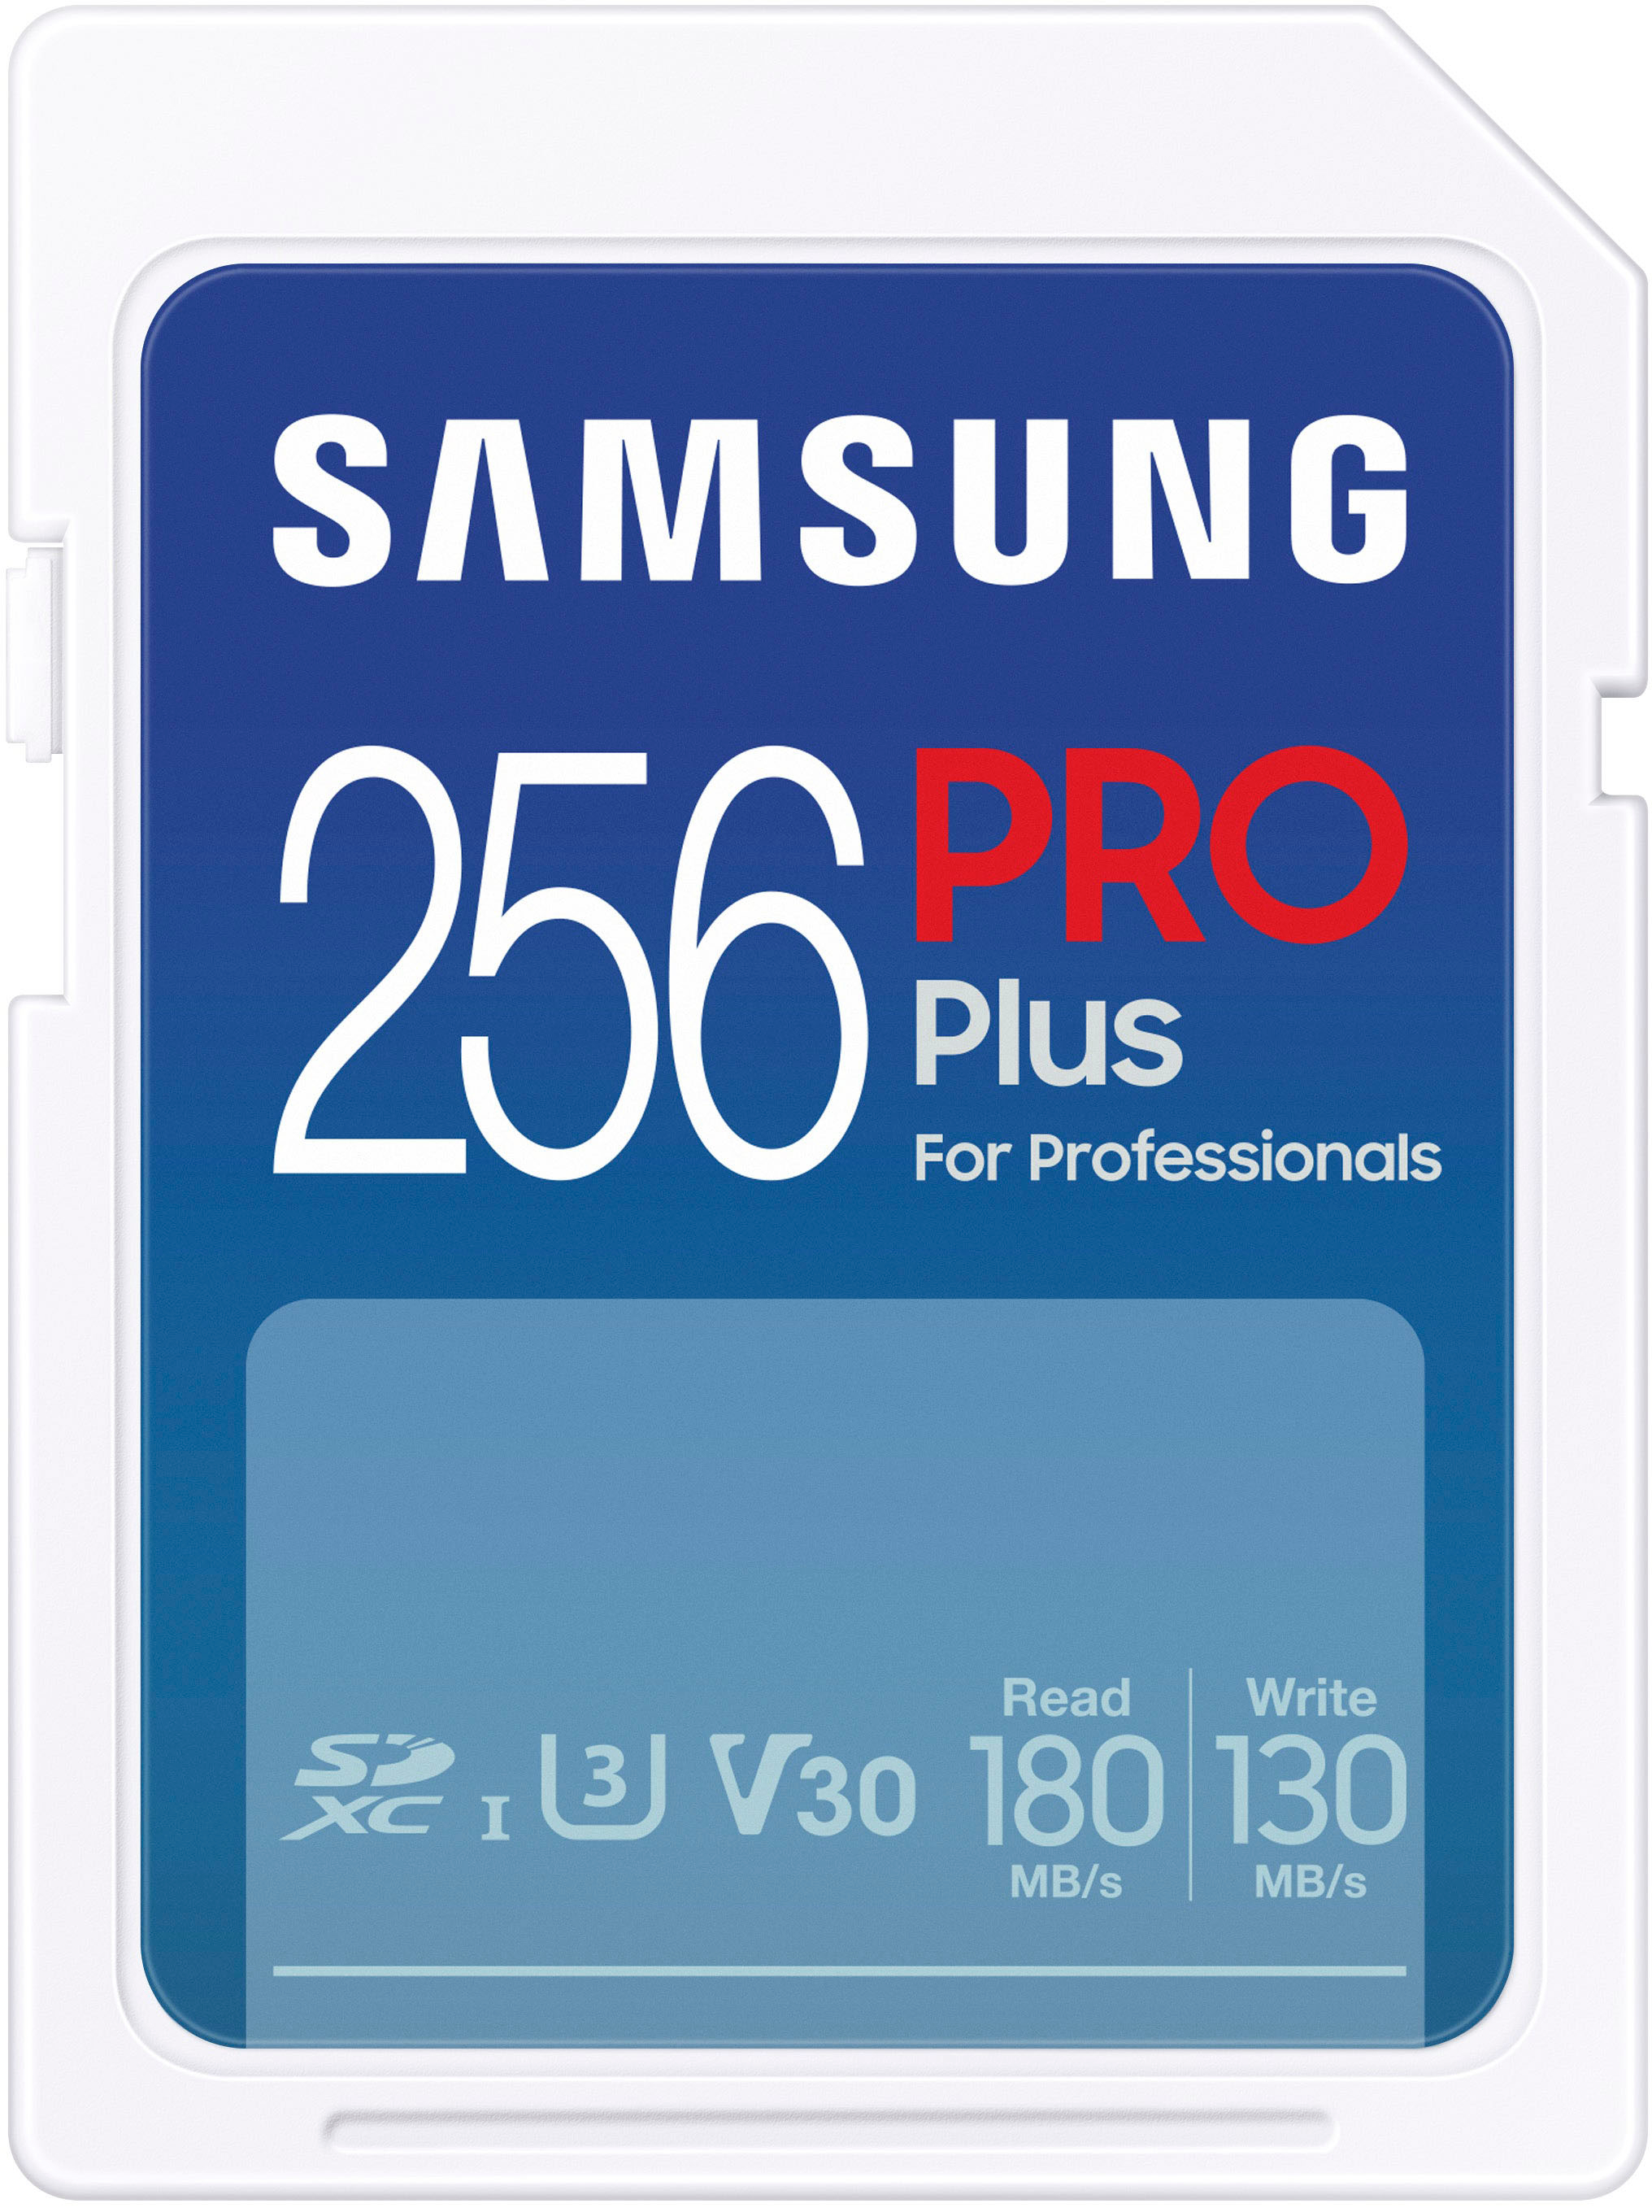 Samsung PRO Plus SD Card Review (256GB) 